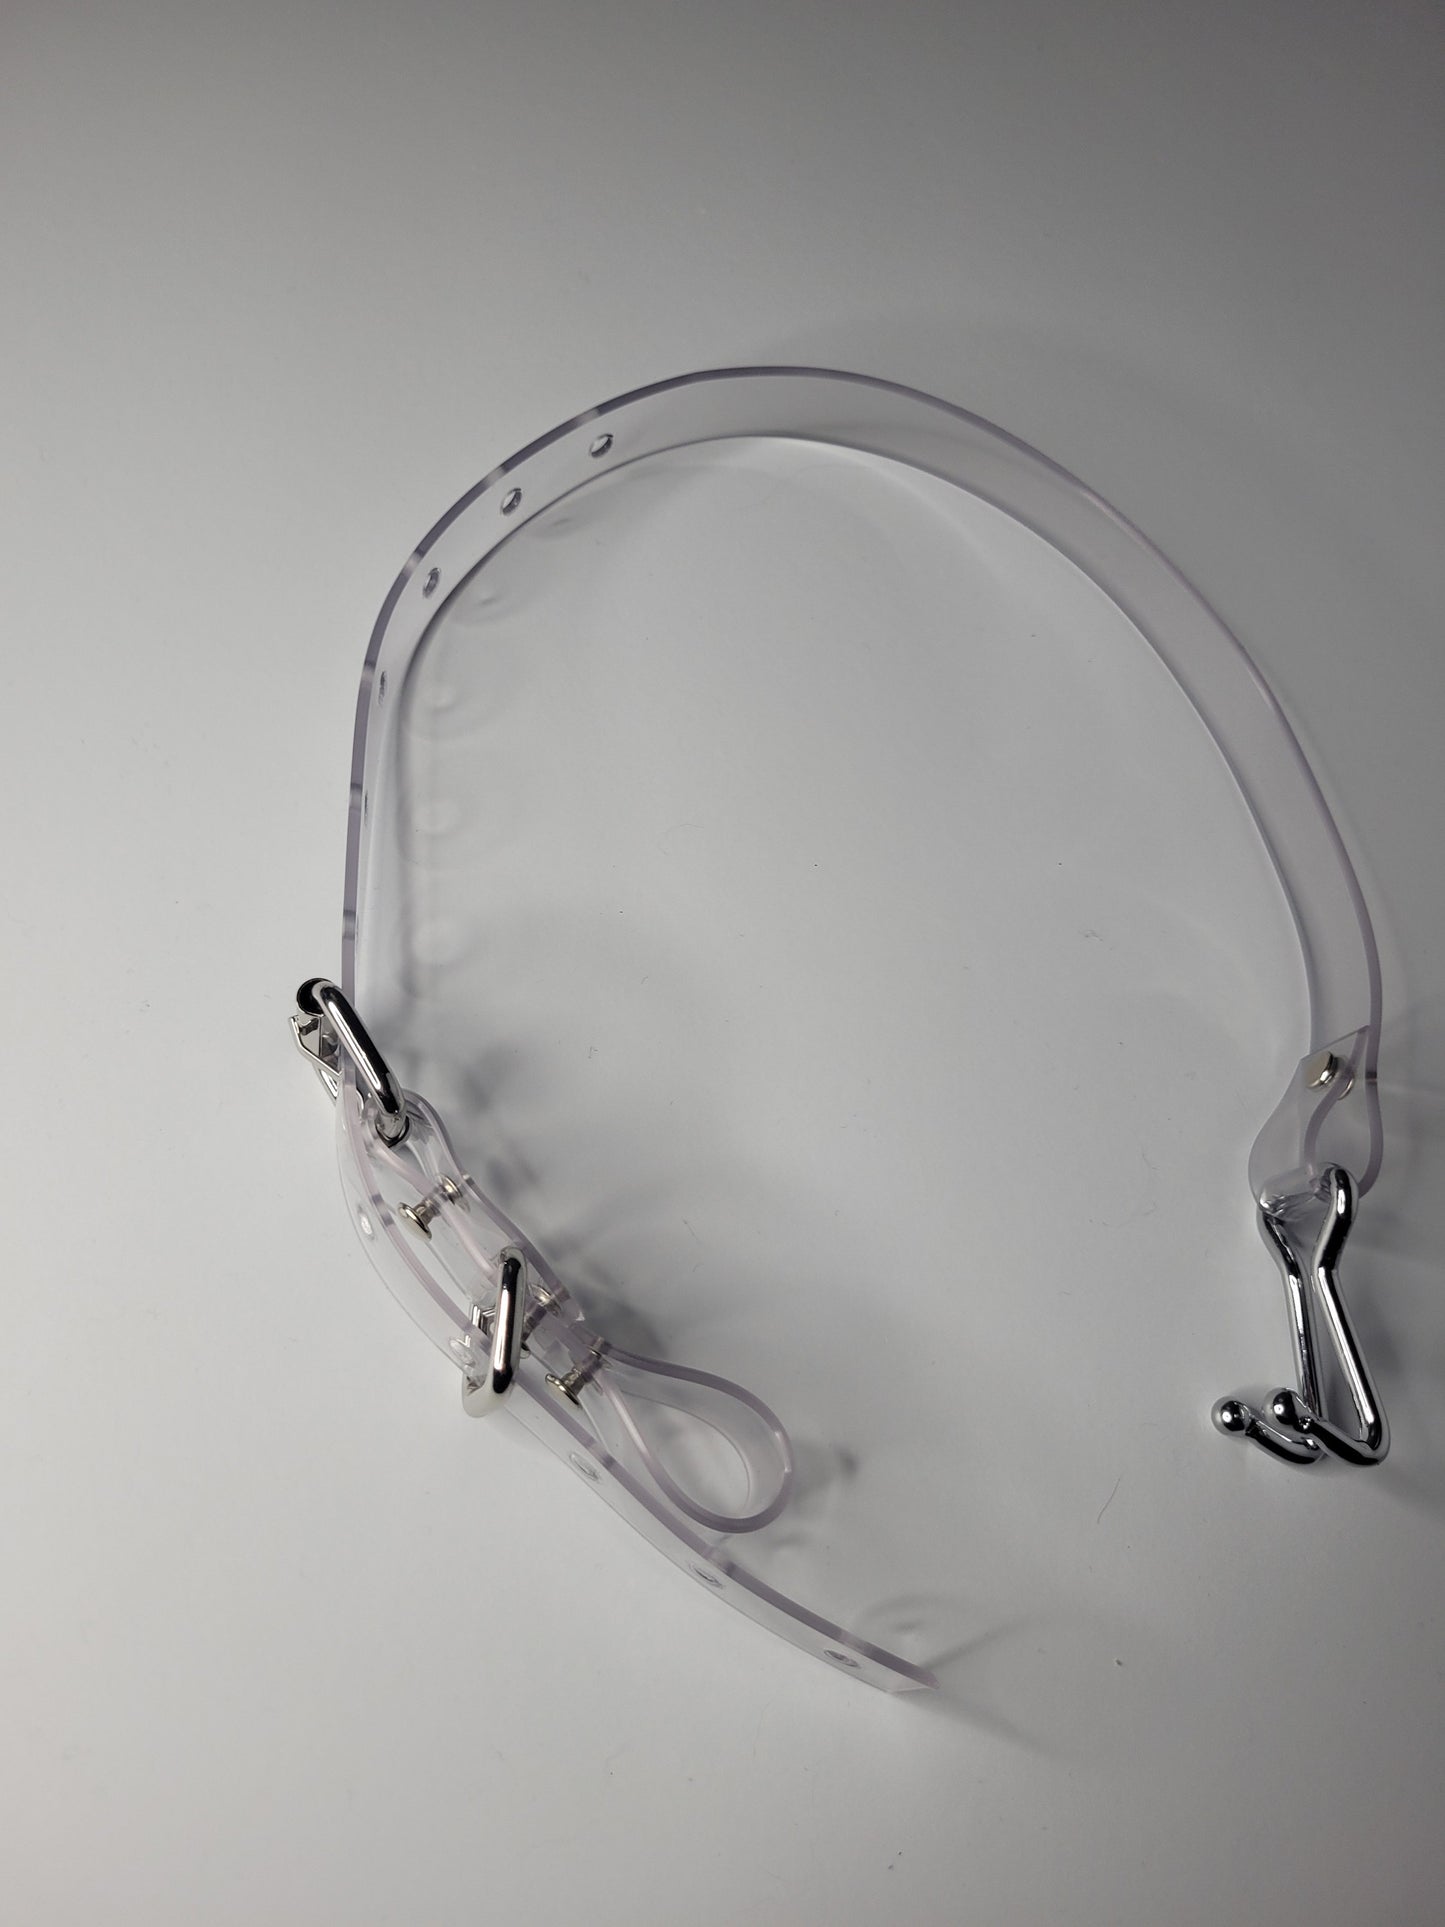 Nose hook in Clear PVC type 2